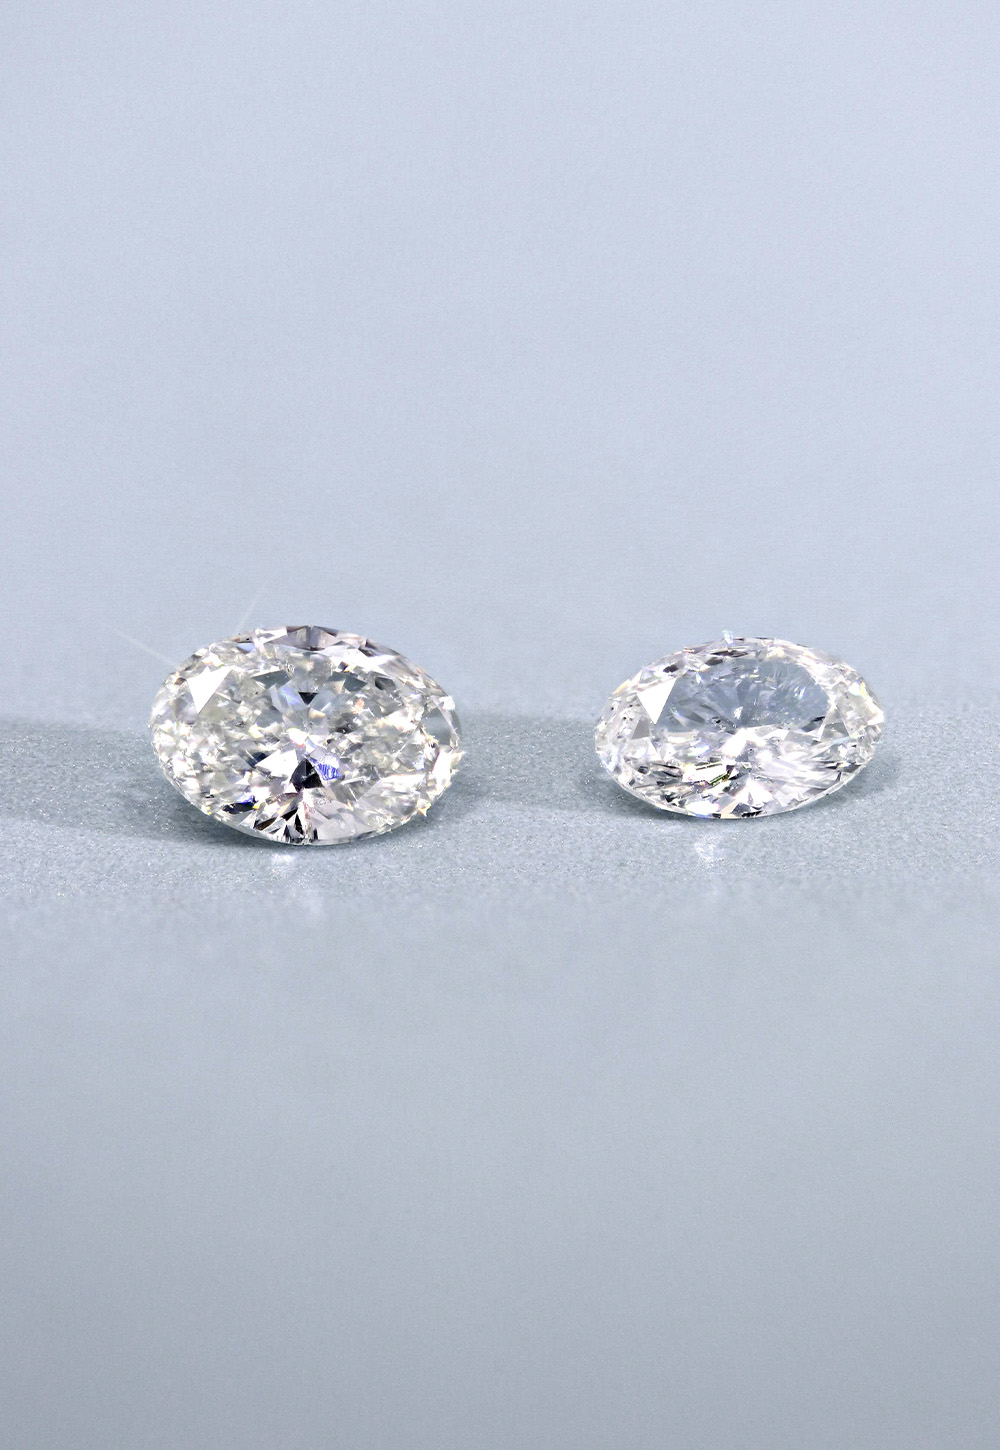 Natural Diamonds at La Mine d'Or Moncton, NB and Halifax, NS